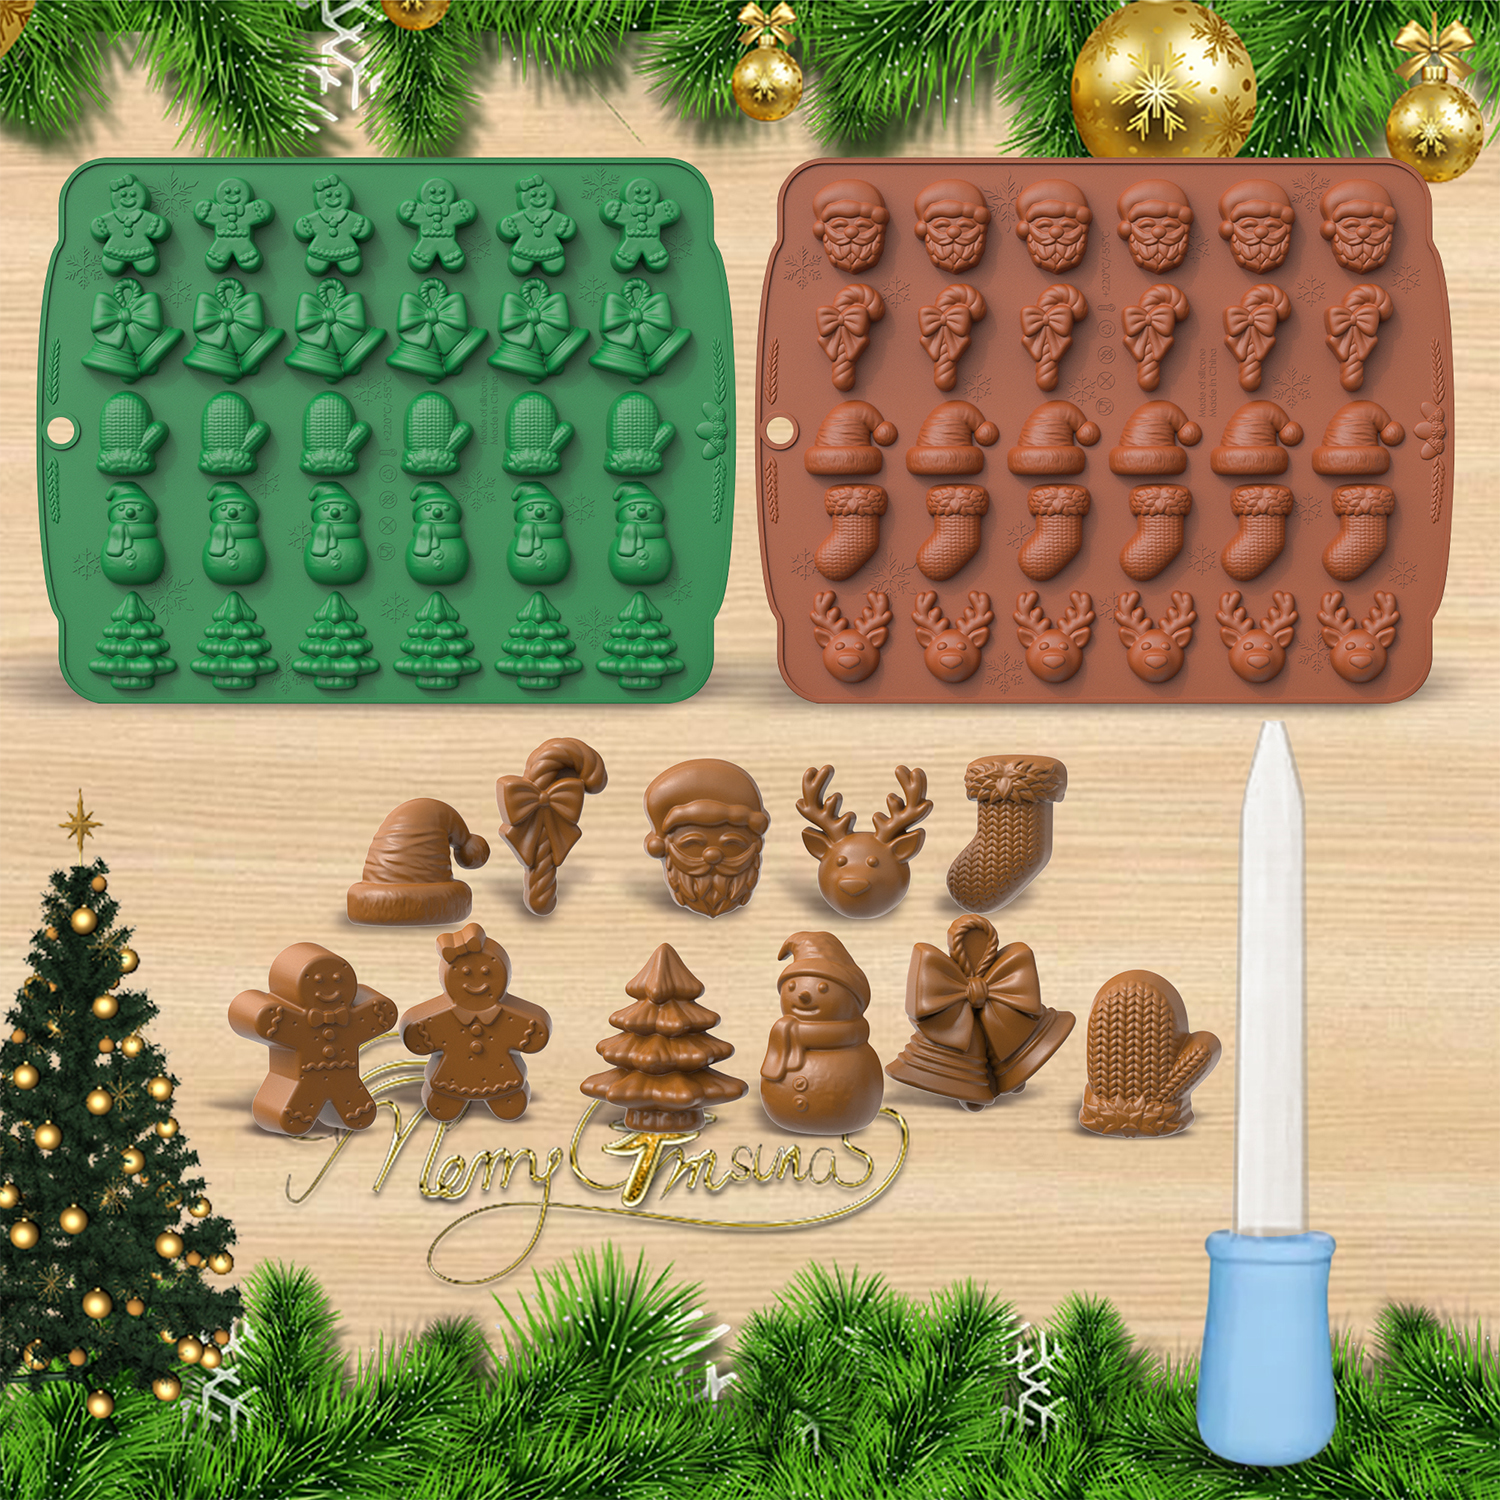  Set of 3 Holiday Christmas Shaped Silicone Ice Cube Soap Making  Trays/Molds - Gingerbread Men/Candy Canes, Snowflakes & Christmas Trees:  Home & Kitchen